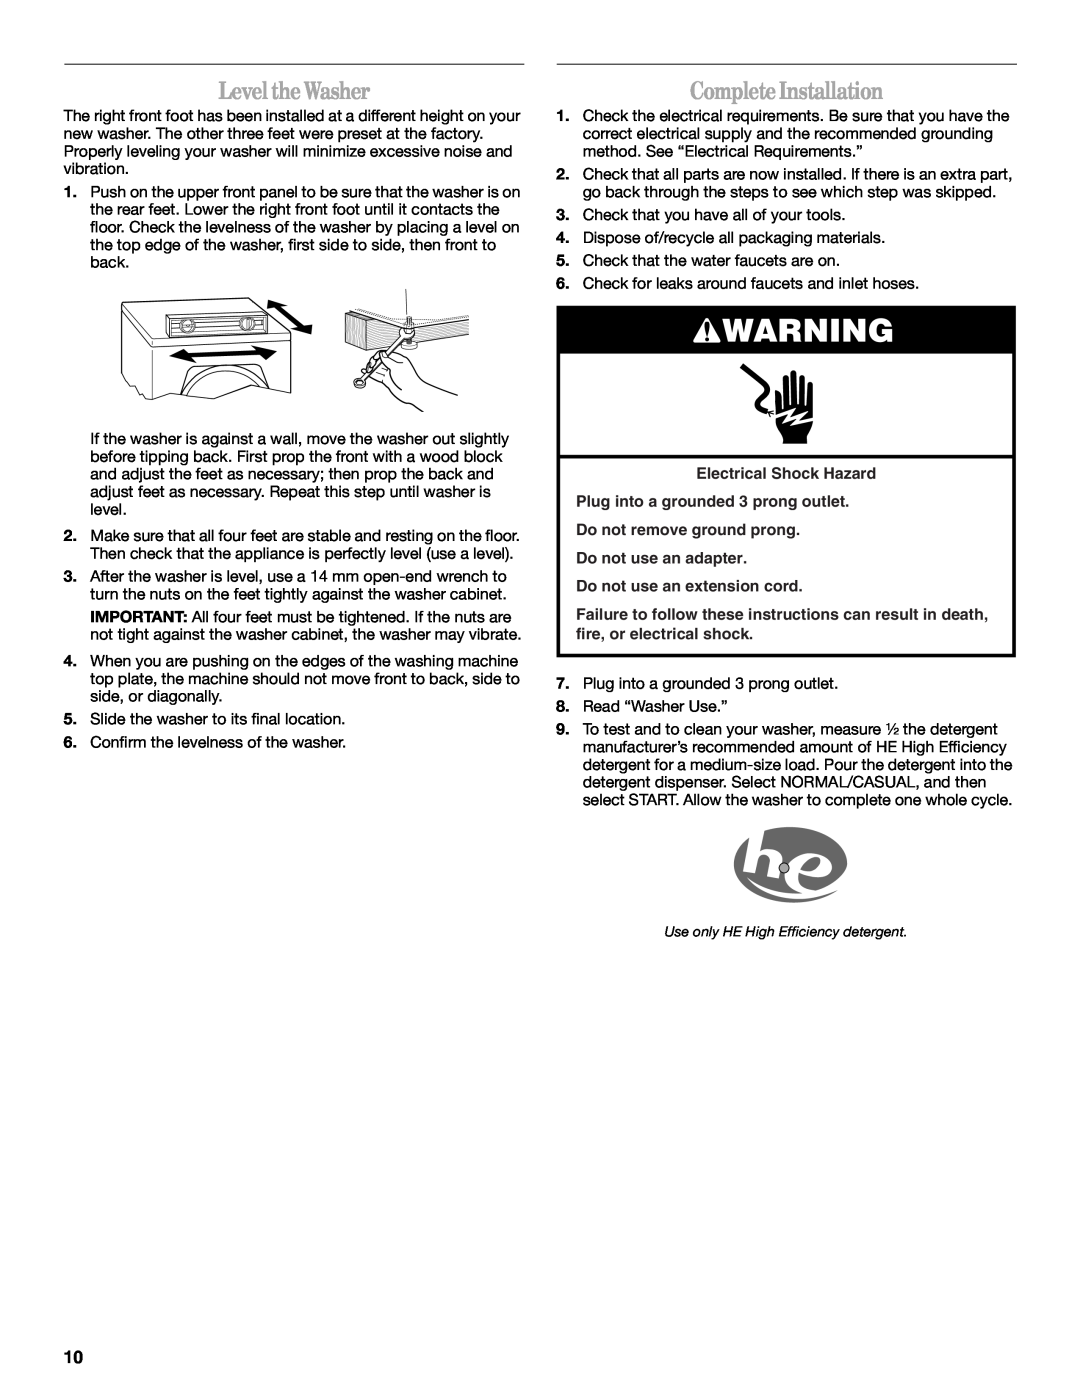 Whirlpool W10063560 Level theWasher, CompleteInstallation, Electrical Shock Hazard Plug into a grounded 3 prong outlet 